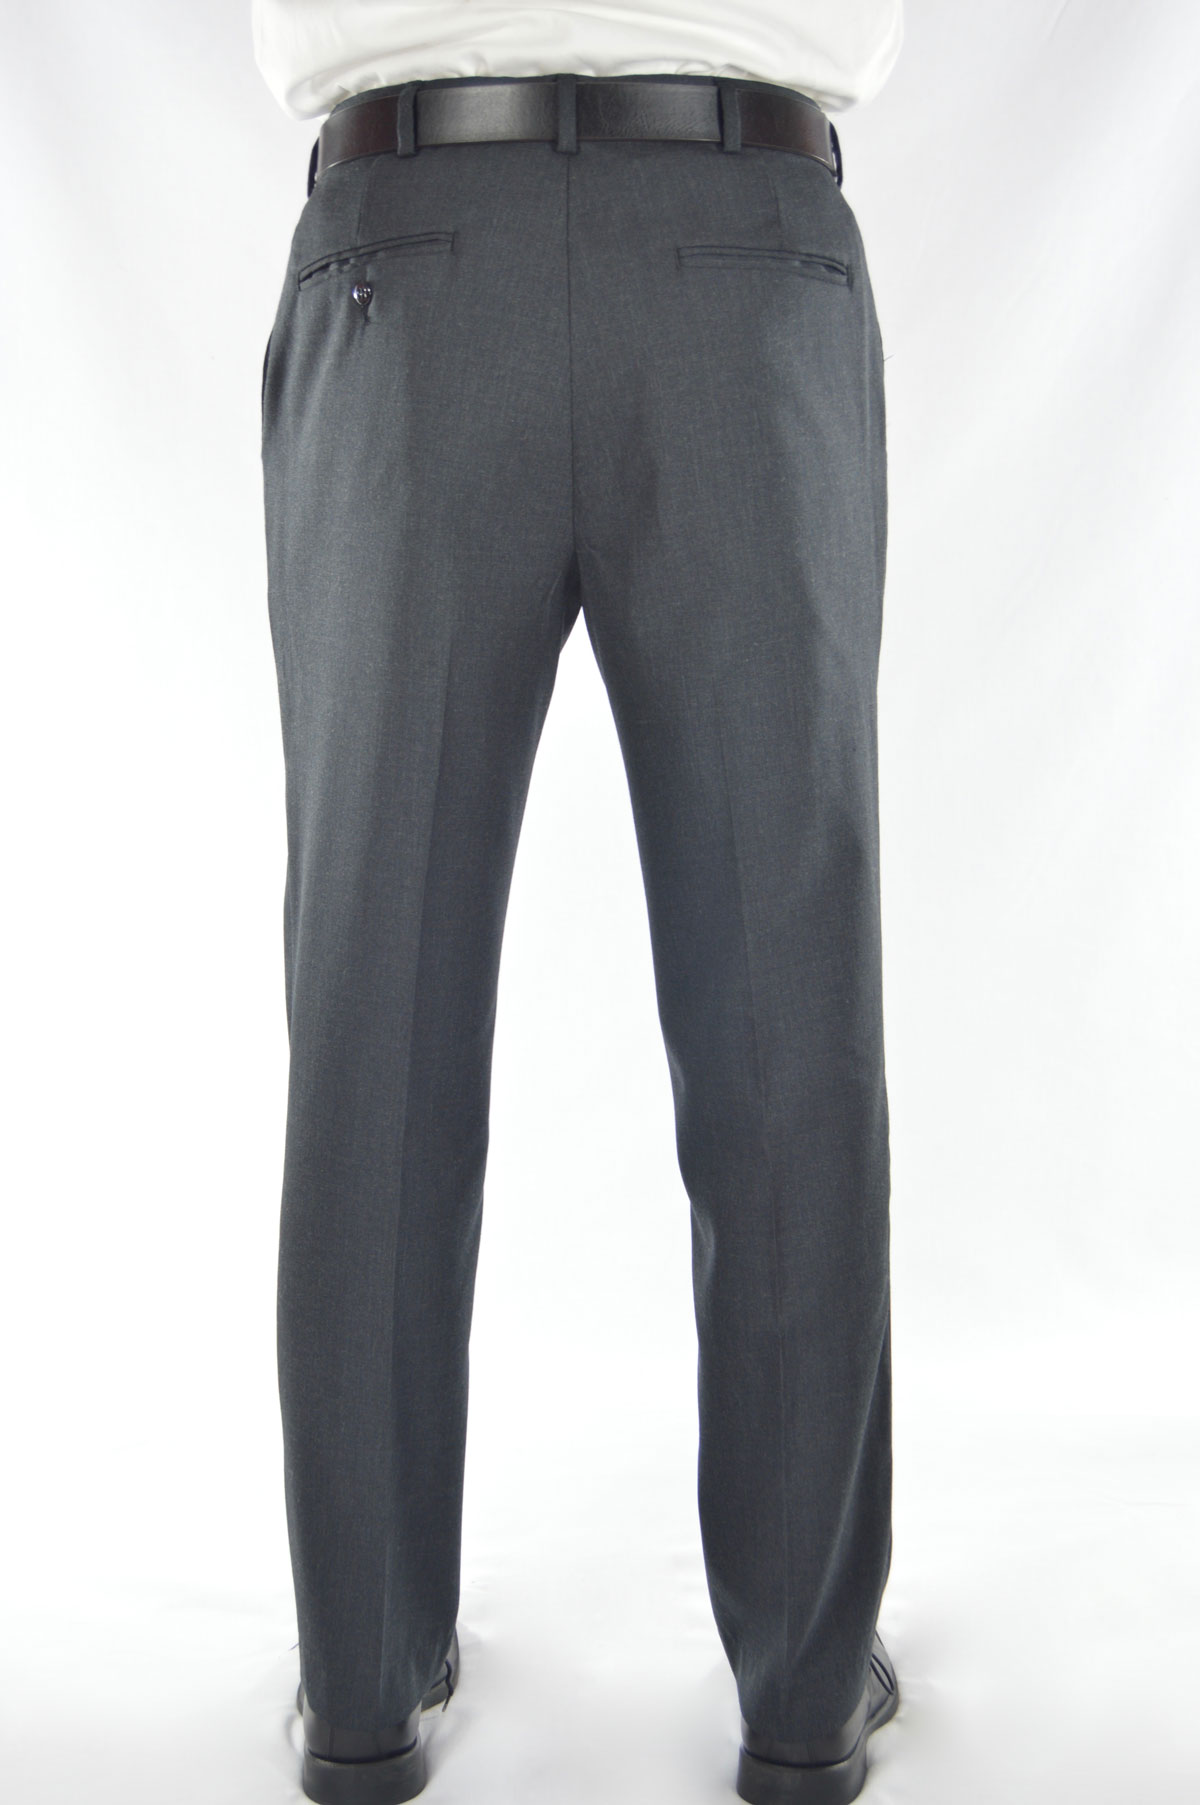 Pendleton Cuffed Trouser Pants Worsted Wool, $94